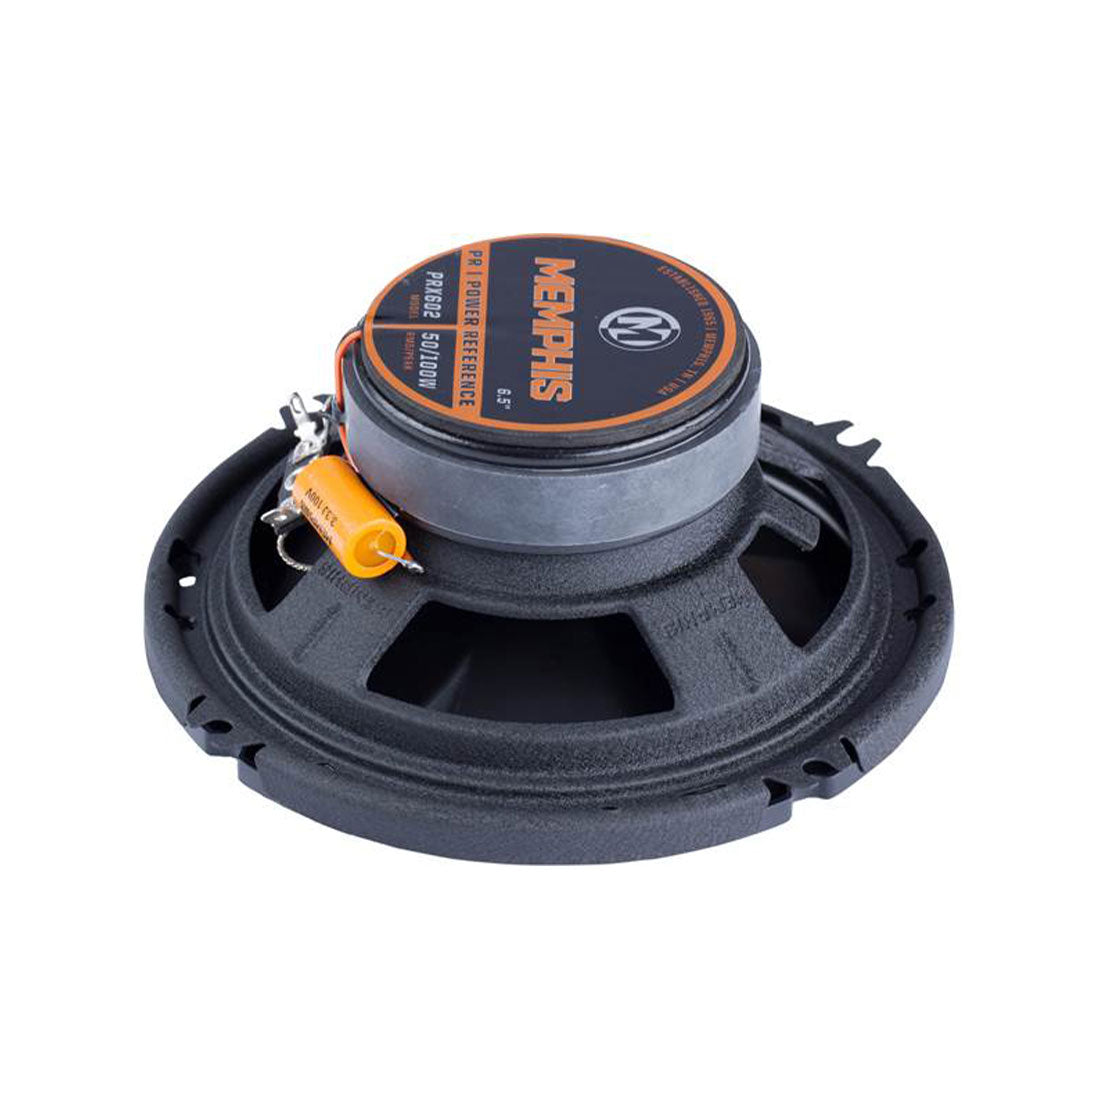 Memphis Audio PRX602 Power Reference 6.5" 2-Way Coaxial Speakers